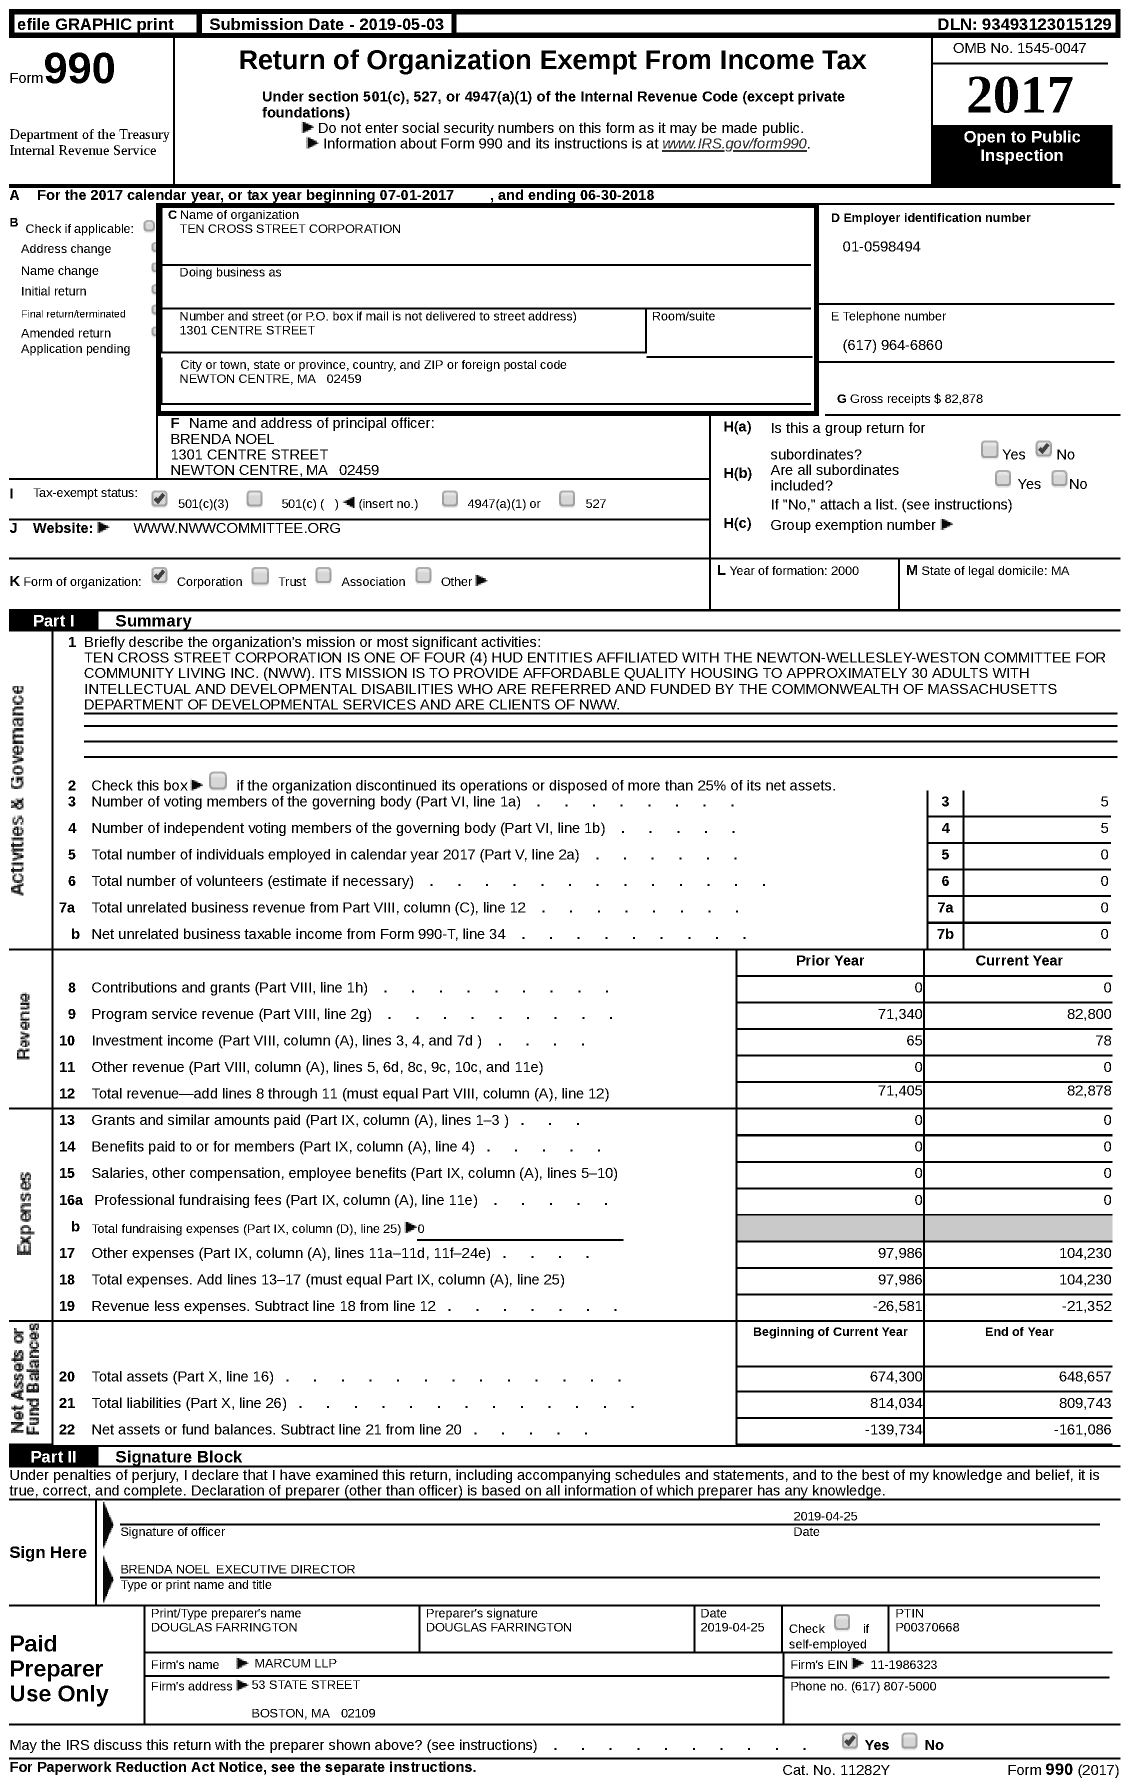 Image of first page of 2017 Form 990 for Ten Cross Street Corporation